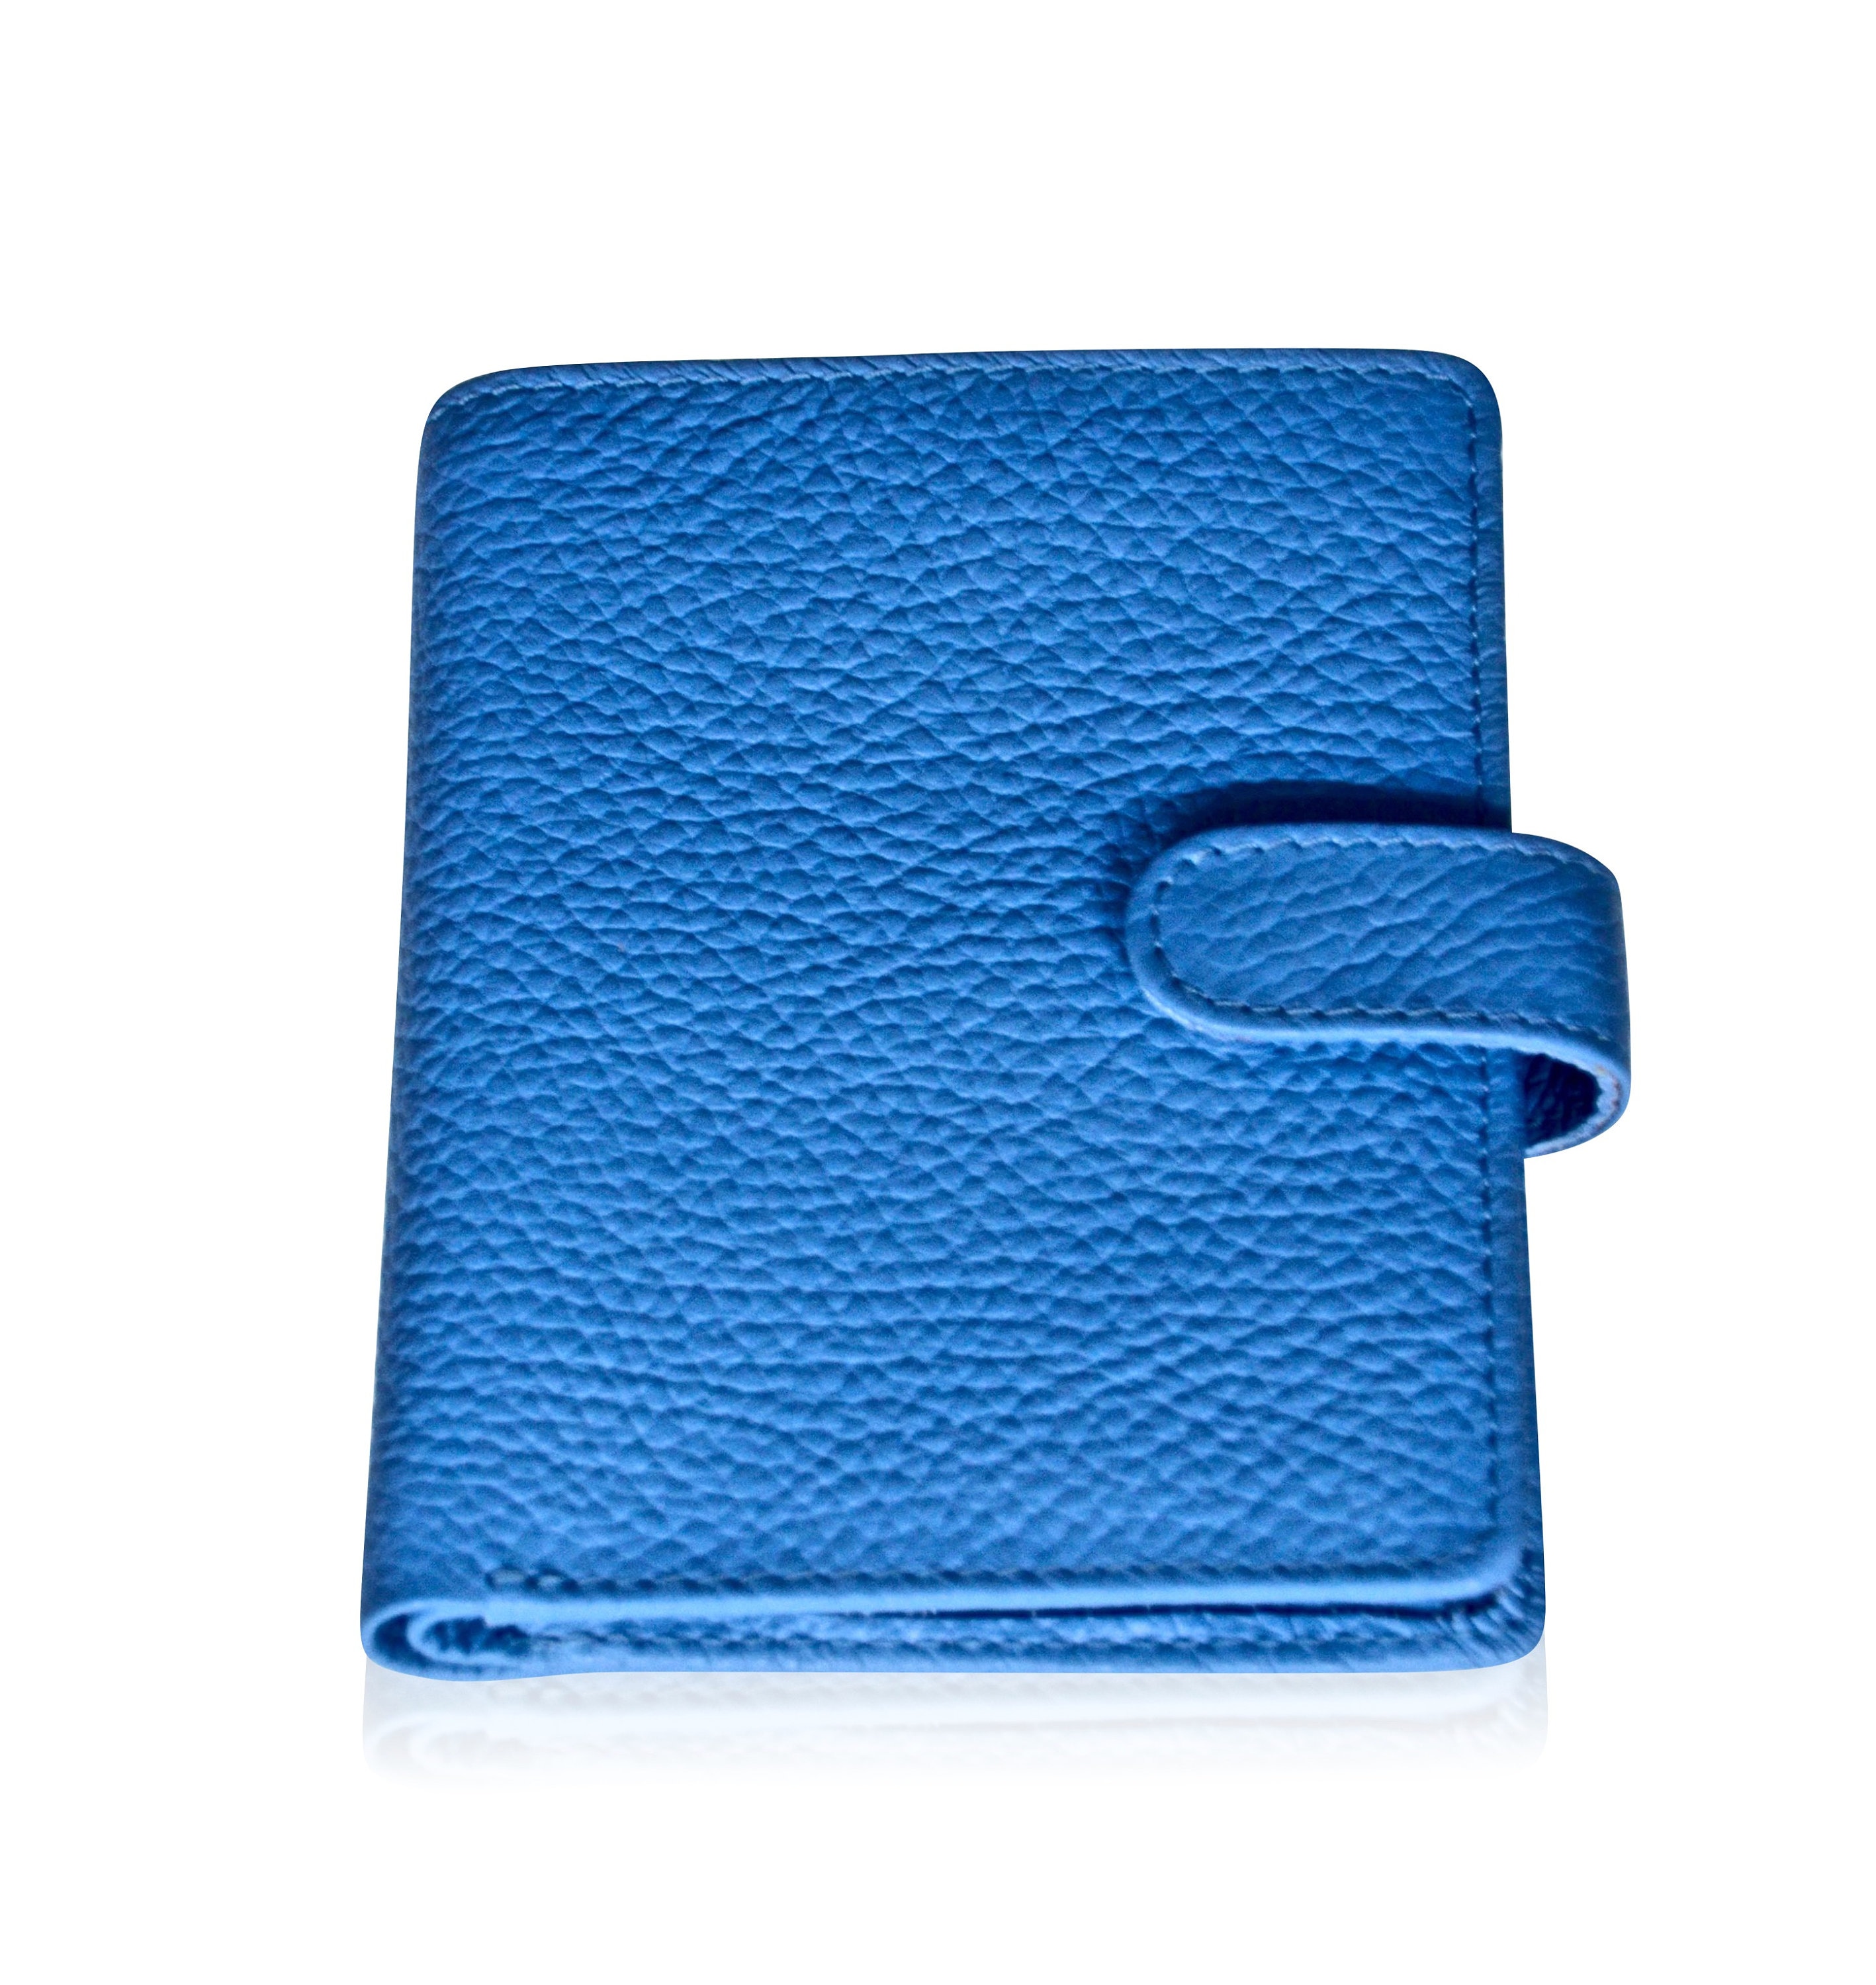 Blue Wallet, Bifold Wallet, An Elegant and Cool Design Wallet for Women Made of Genuine Leather That Folds Up